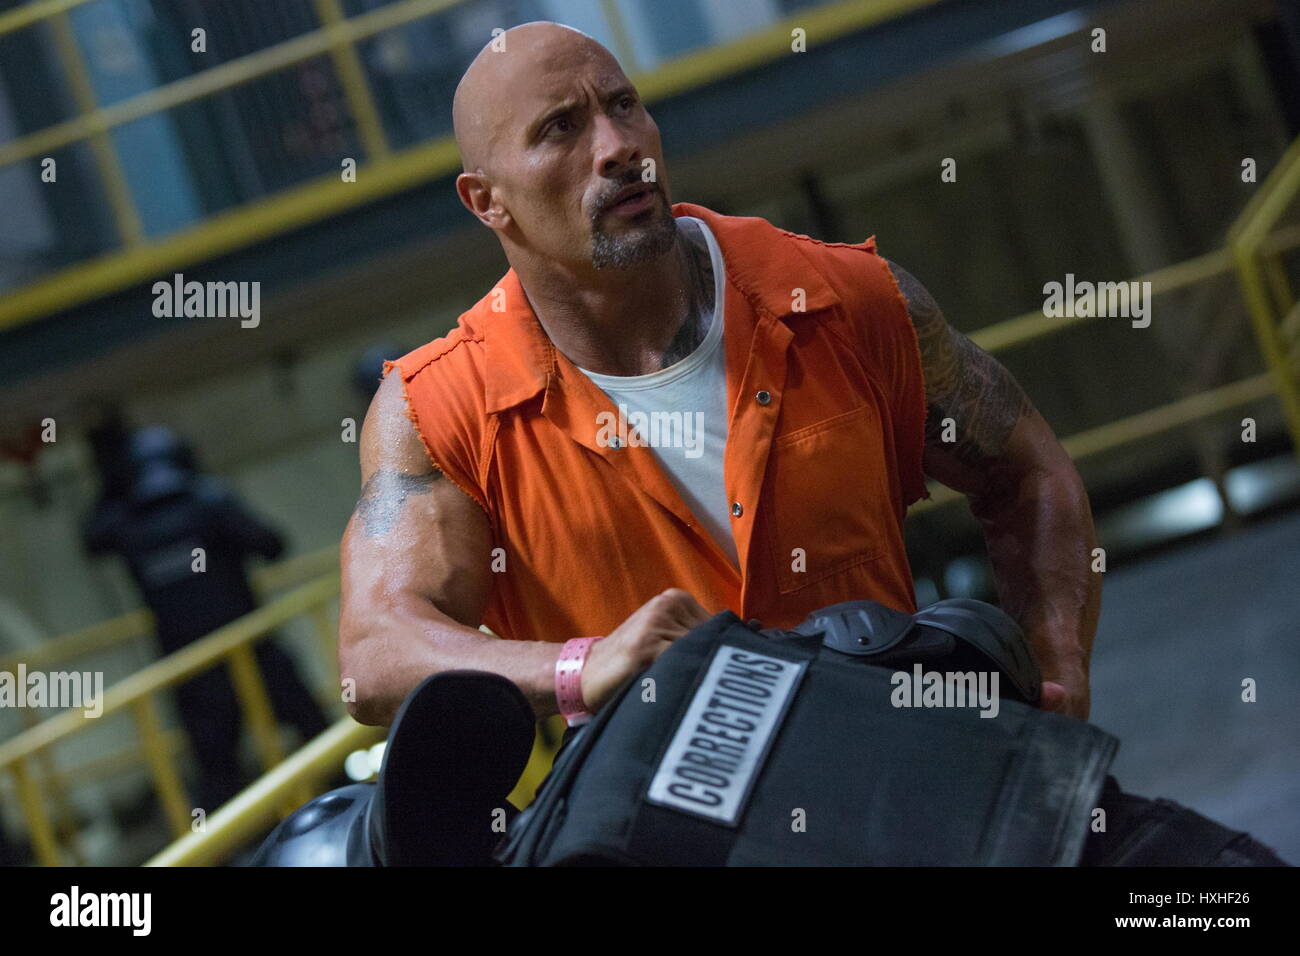 RELEASE DATE: April 14, 2017 TITLE: The Fate of the Furious STUDIO: Universal Pictures DIRECTOR: F. Gary Gray PLOT: When a mysterious woman seduces Dom into the world of crime and a betrayal of those closest to him, the crew face trials that will test them as never before PICTURED: Dwayne Johnson as Hobbs. (Credit Image: © Universal Pictures/Entertainment Pictures/ZUMAPRESS.com) Stock Photo